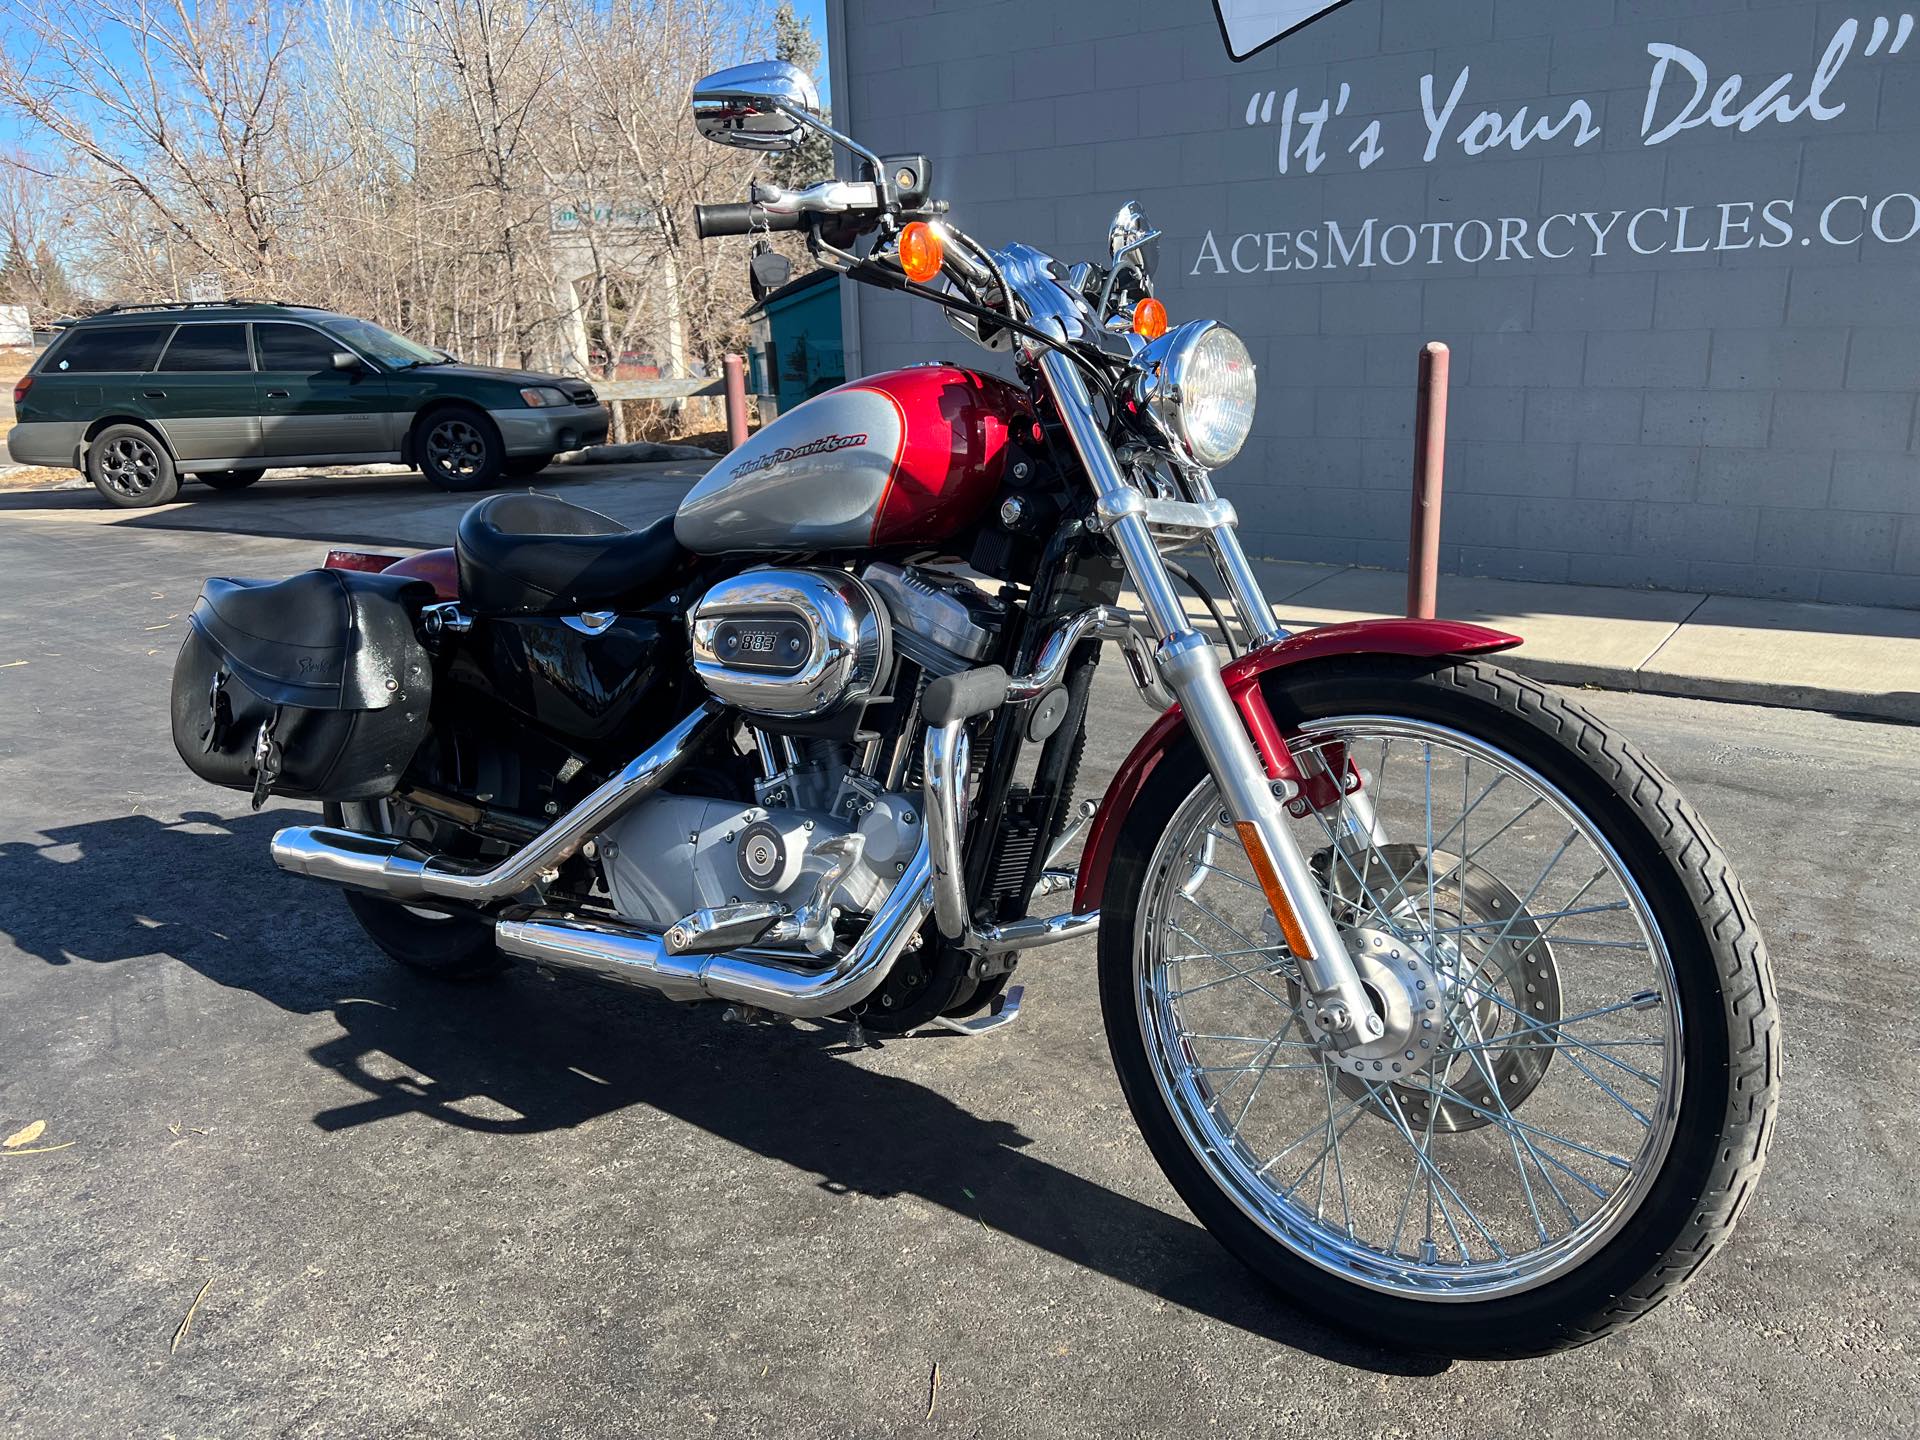 2004 Harley-Davidson Sportster 883 Custom at Aces Motorcycles - Fort Collins